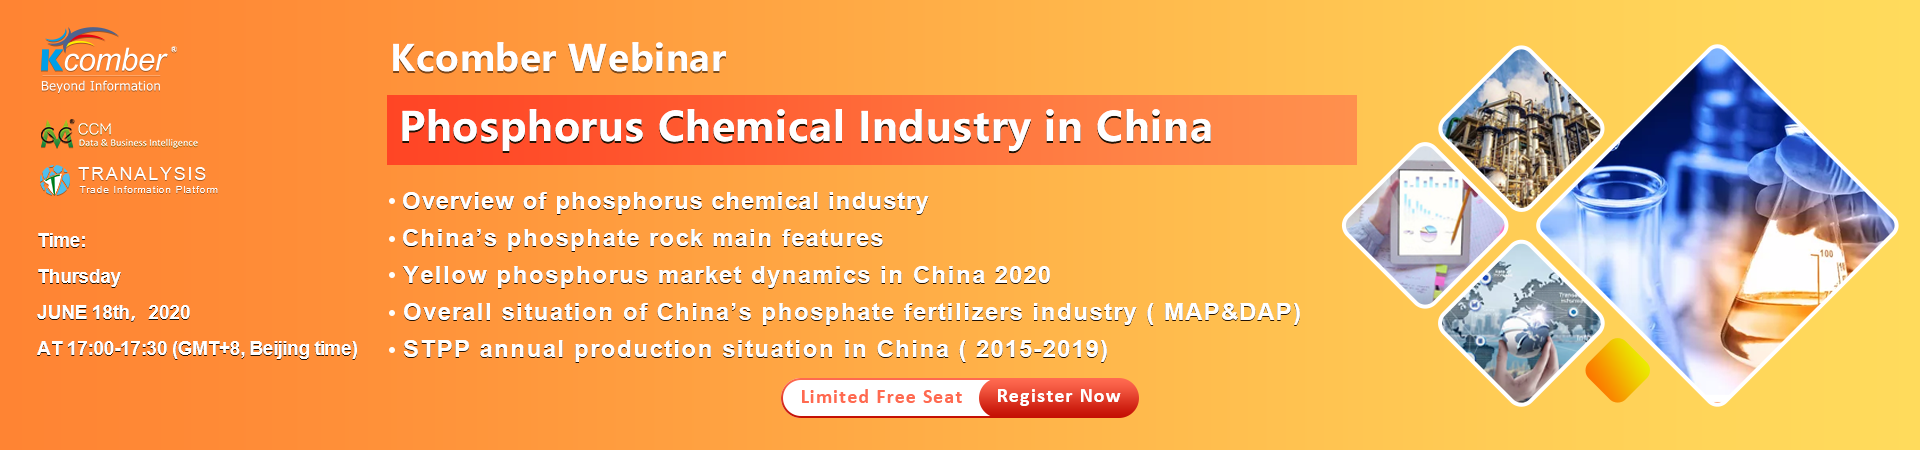 Phosphorus Chemical Industry in China